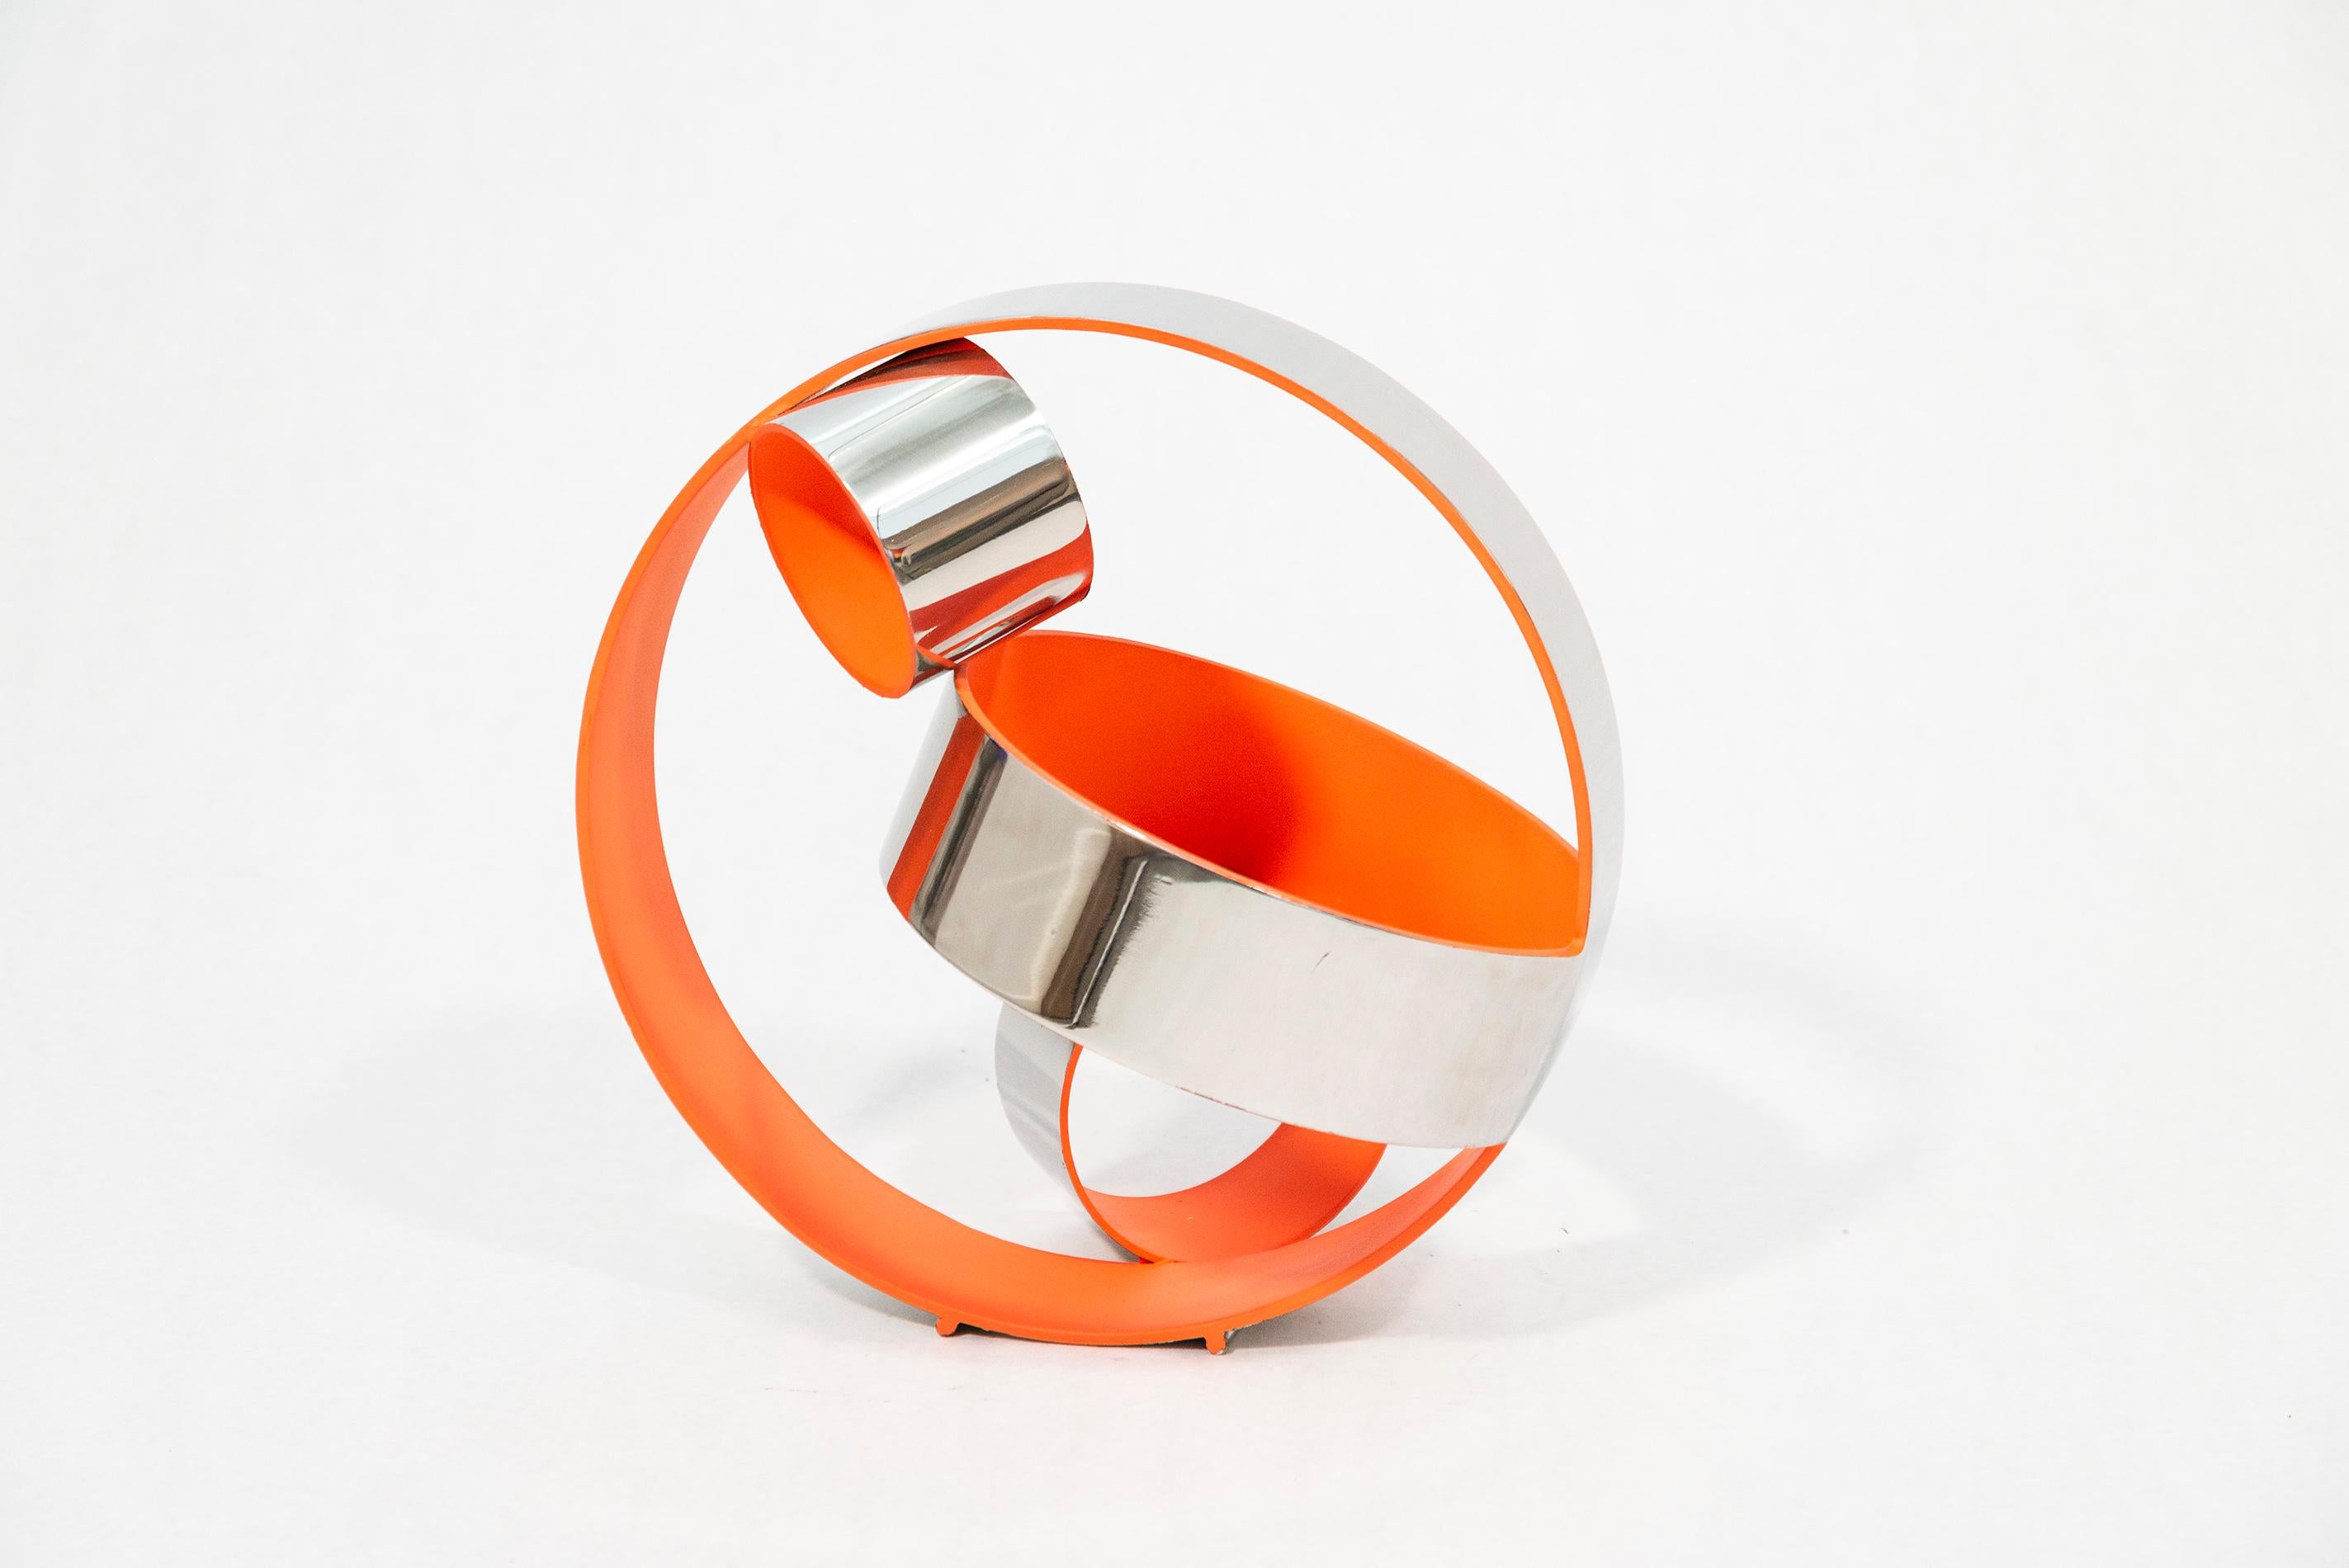 Four Ring Temps Zero Small Orange 1/10 - abstract, stainless steel, sculpture - Contemporary Sculpture by Philippe Pallafray